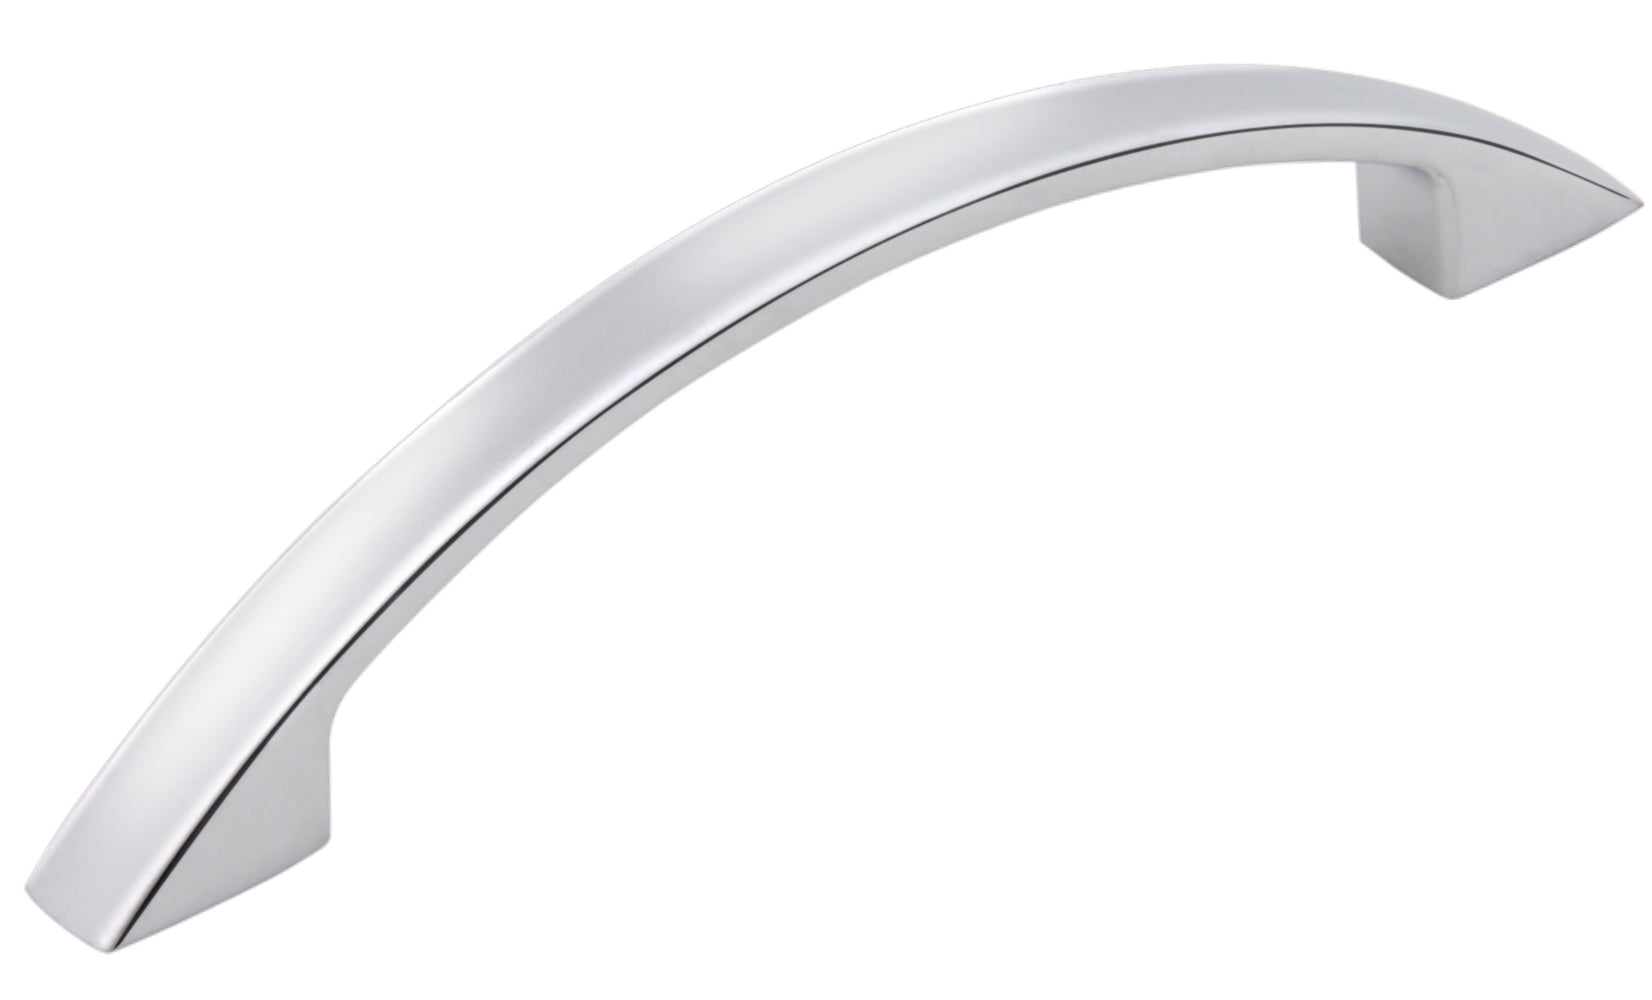 Silverline P2065 - 4-4/5 inch (122mm) Zinc Alloy Arched Curved Contemporary Cabinet Pull Handle CC: 3-3/4 inch (96mm) Various Finishes